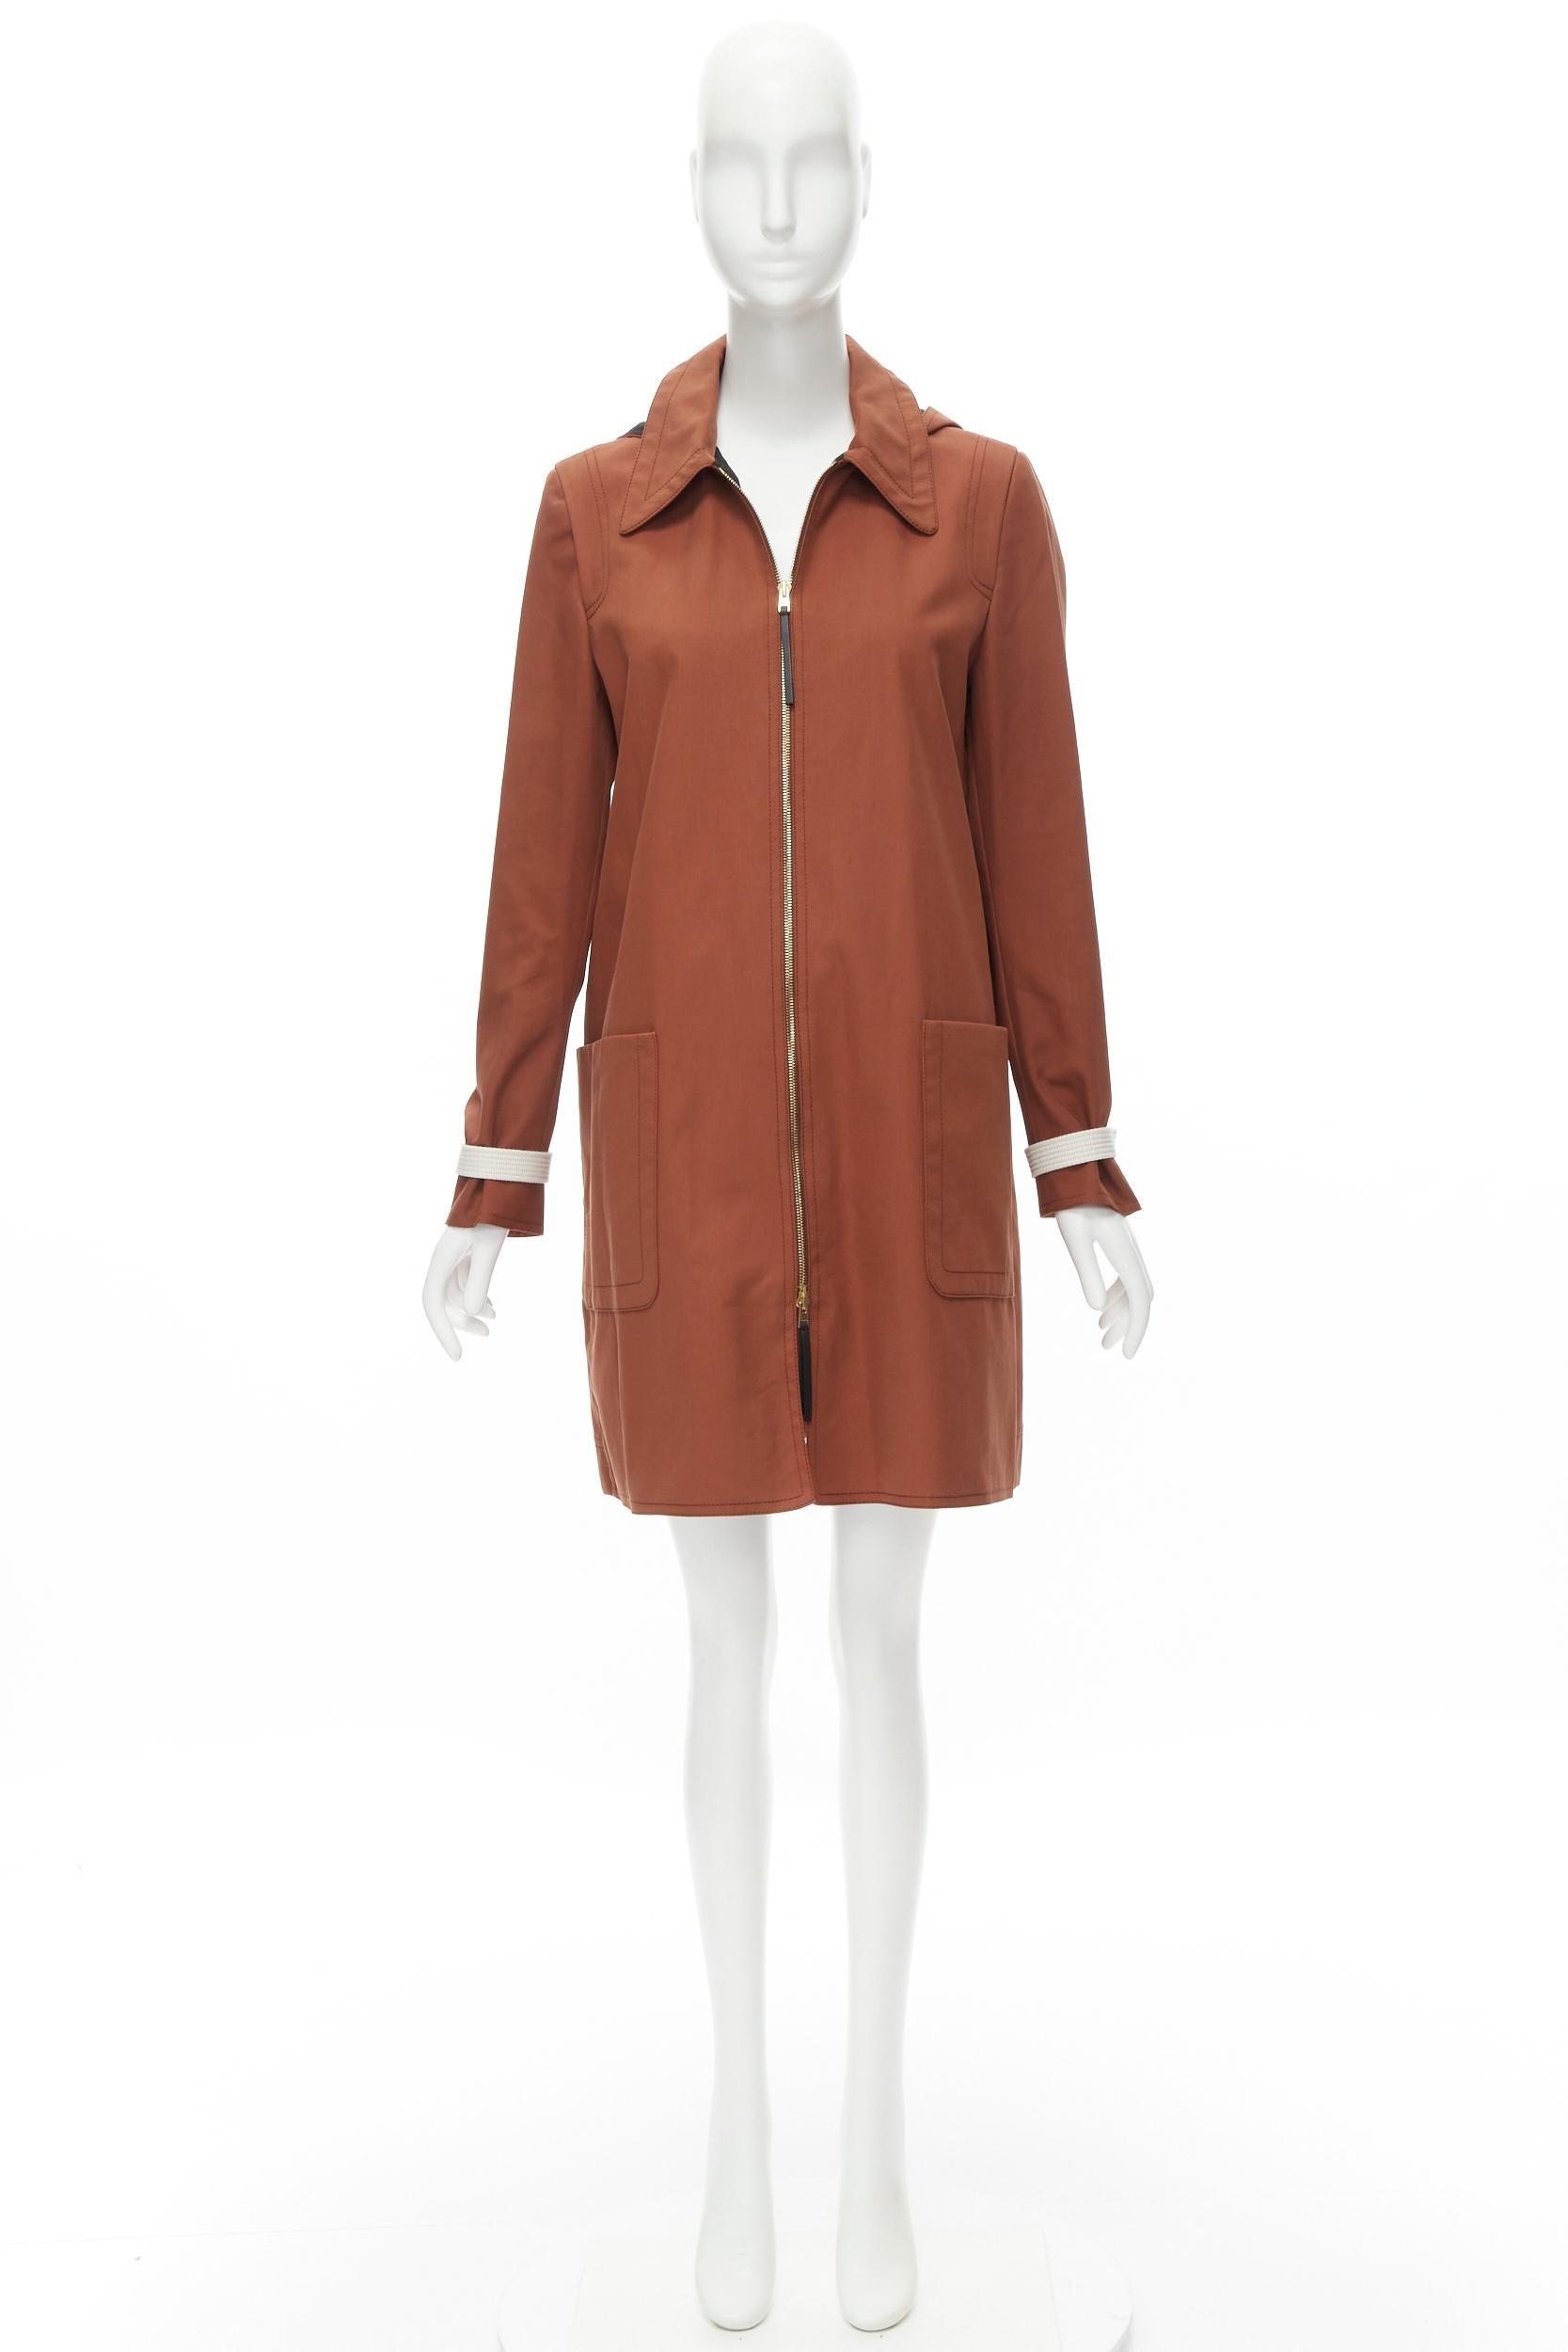 MARNI brick red cotton strapped cuff zip front hooded overcoat IT40 S For Sale 7